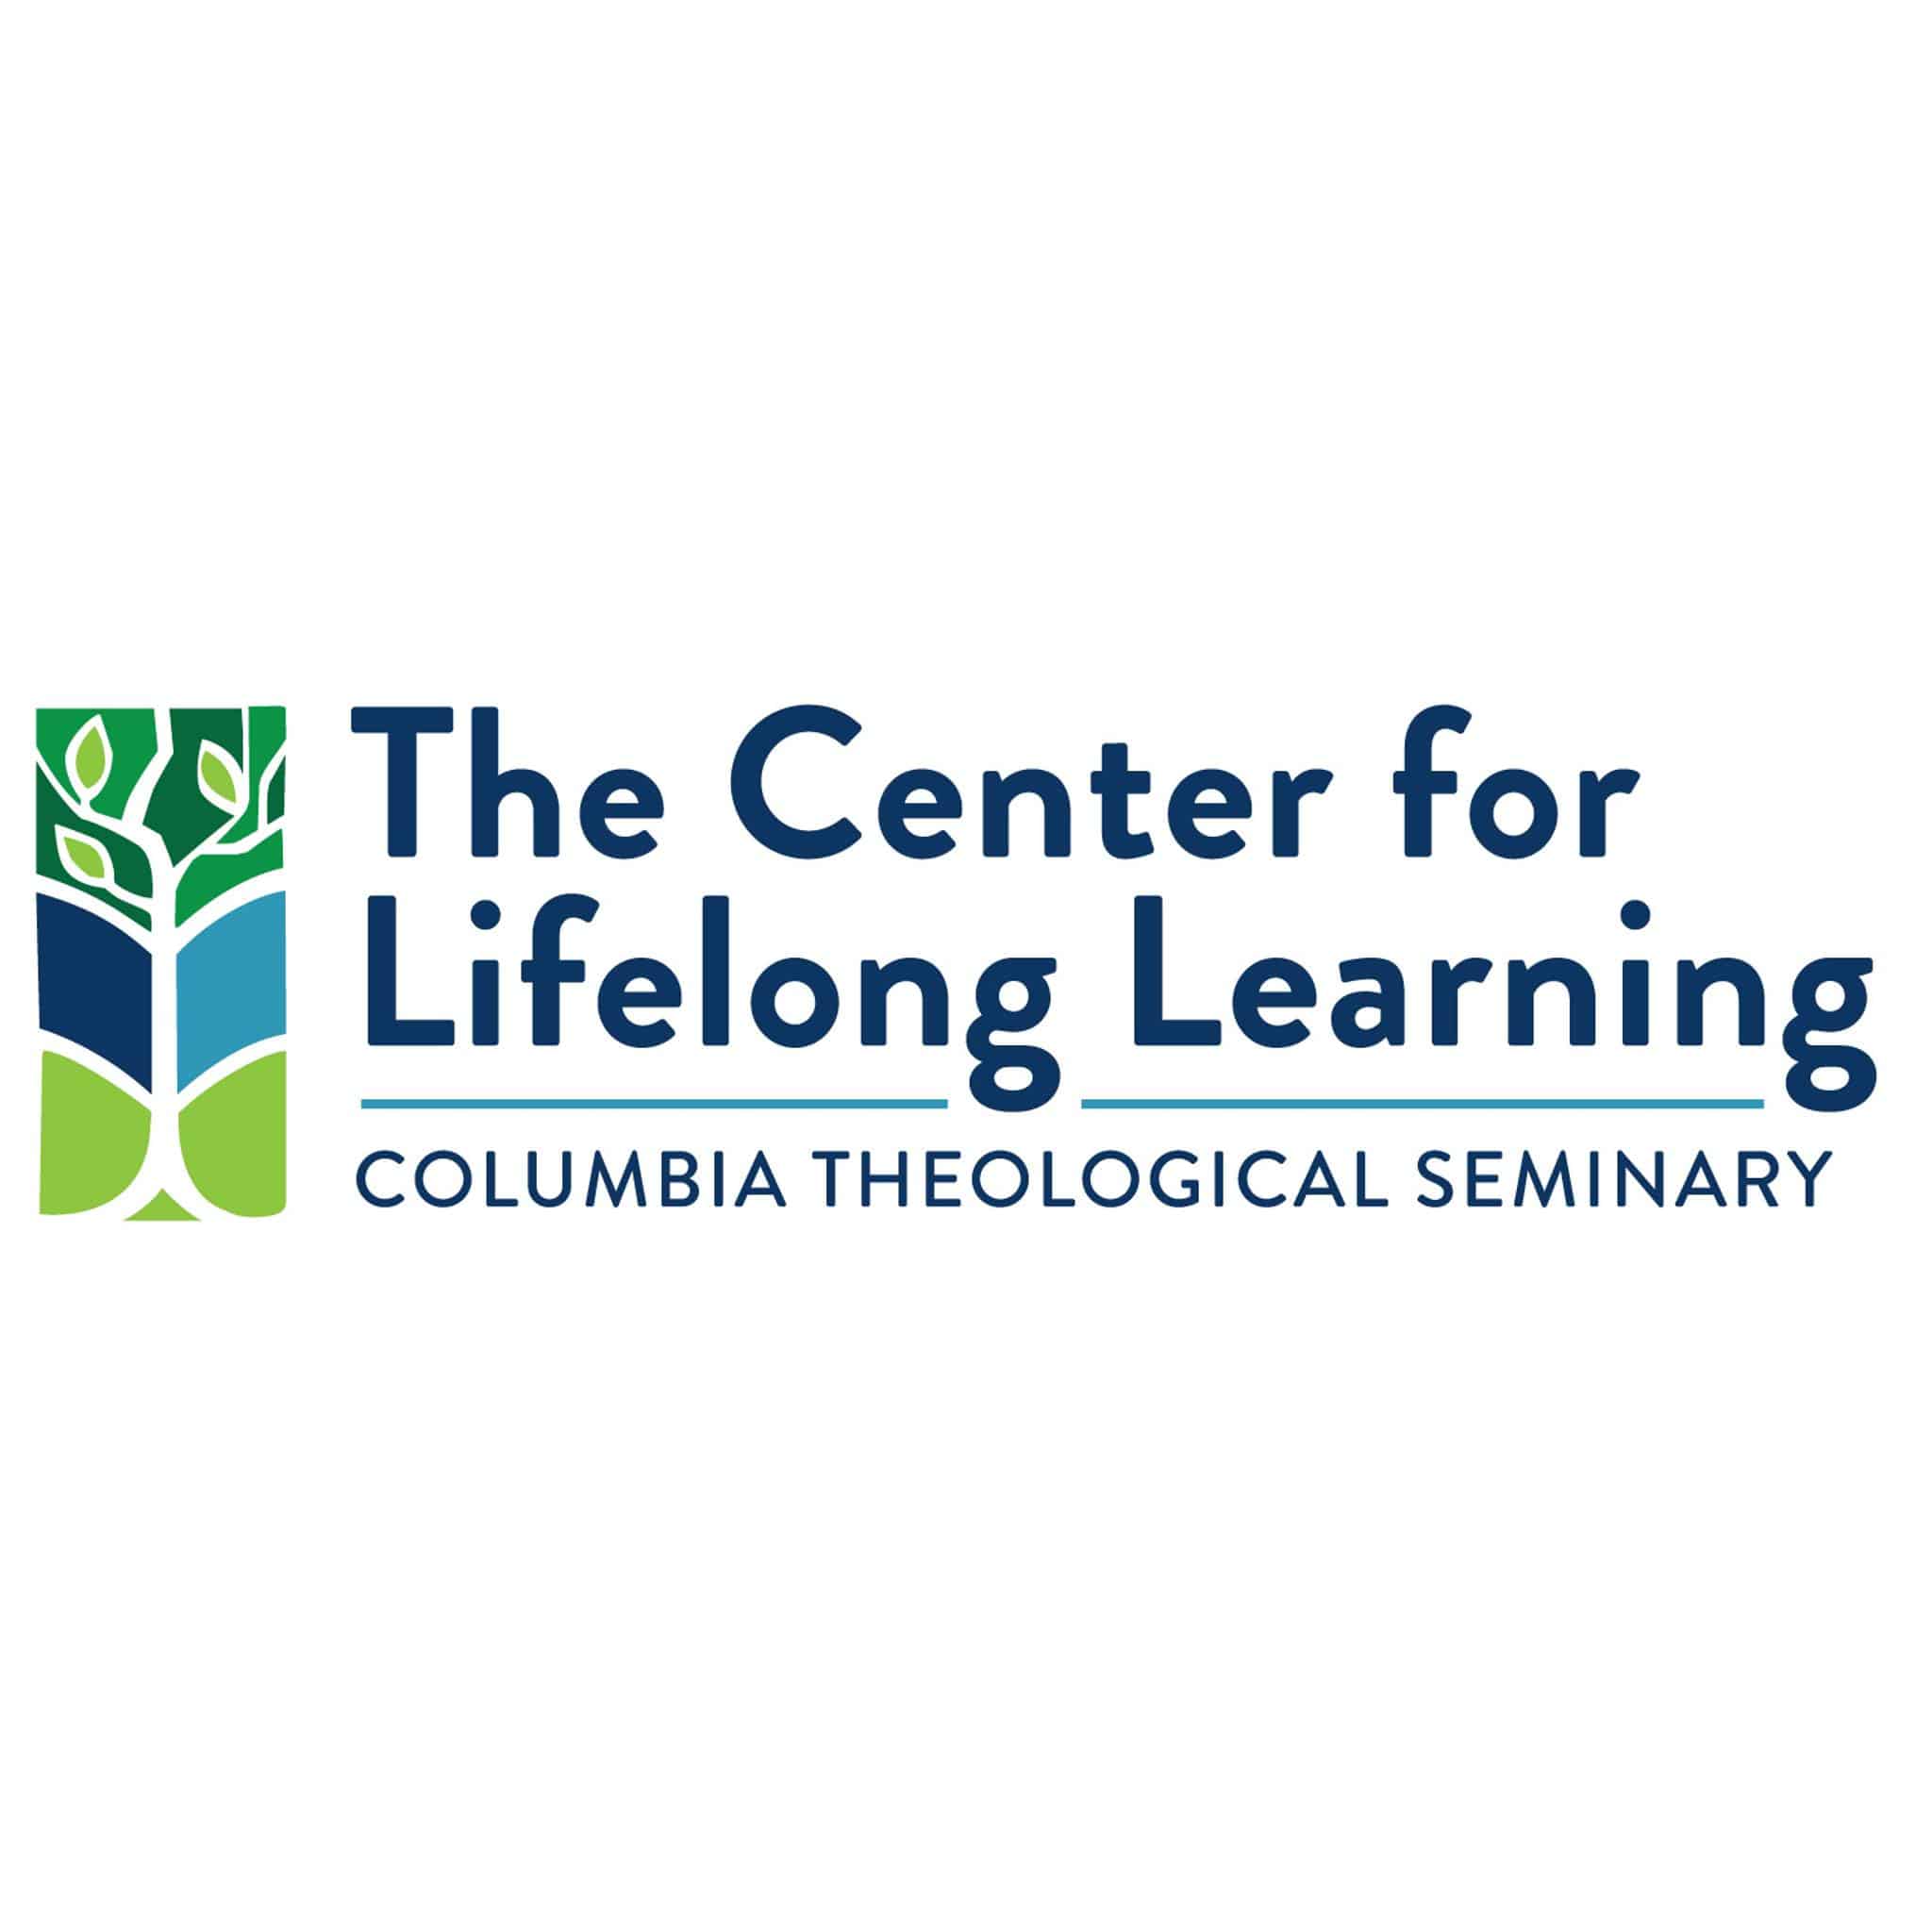 Image of Columbia Theological Seminary's Center for Lifelong Learning